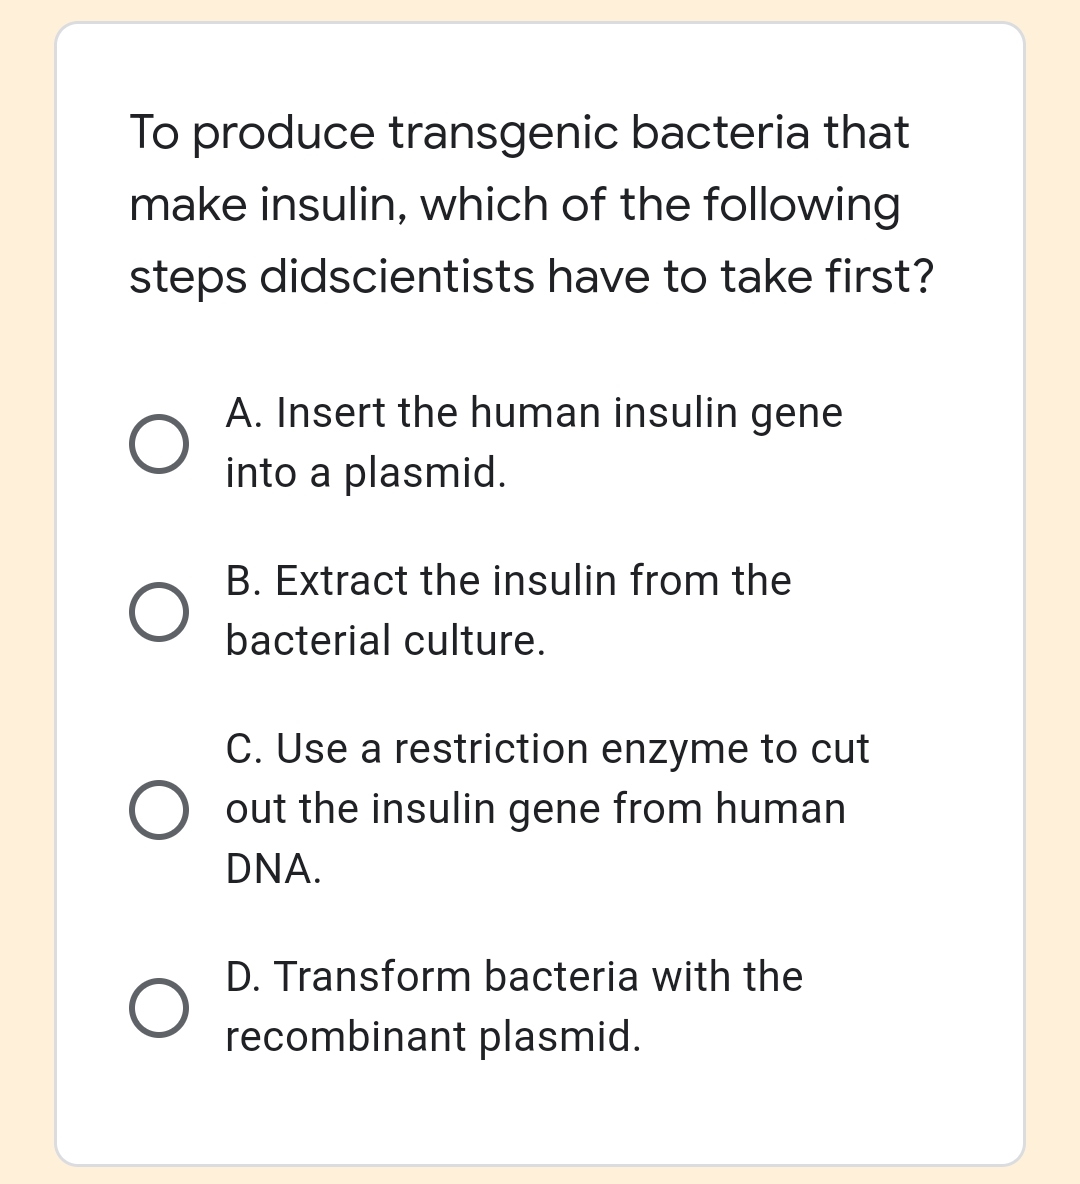 To produce transgenic bacteria that
make insulin, which of the following
steps didscientists have to take first?
A. Insert the human insulin gene
into a plasmid.
B. Extract the insulin from the
bacterial culture.
C. Use a restriction enzyme to cut
O out the insulin gene from human
DNA.
D. Transform bacteria with the
recombinant plasmid.
